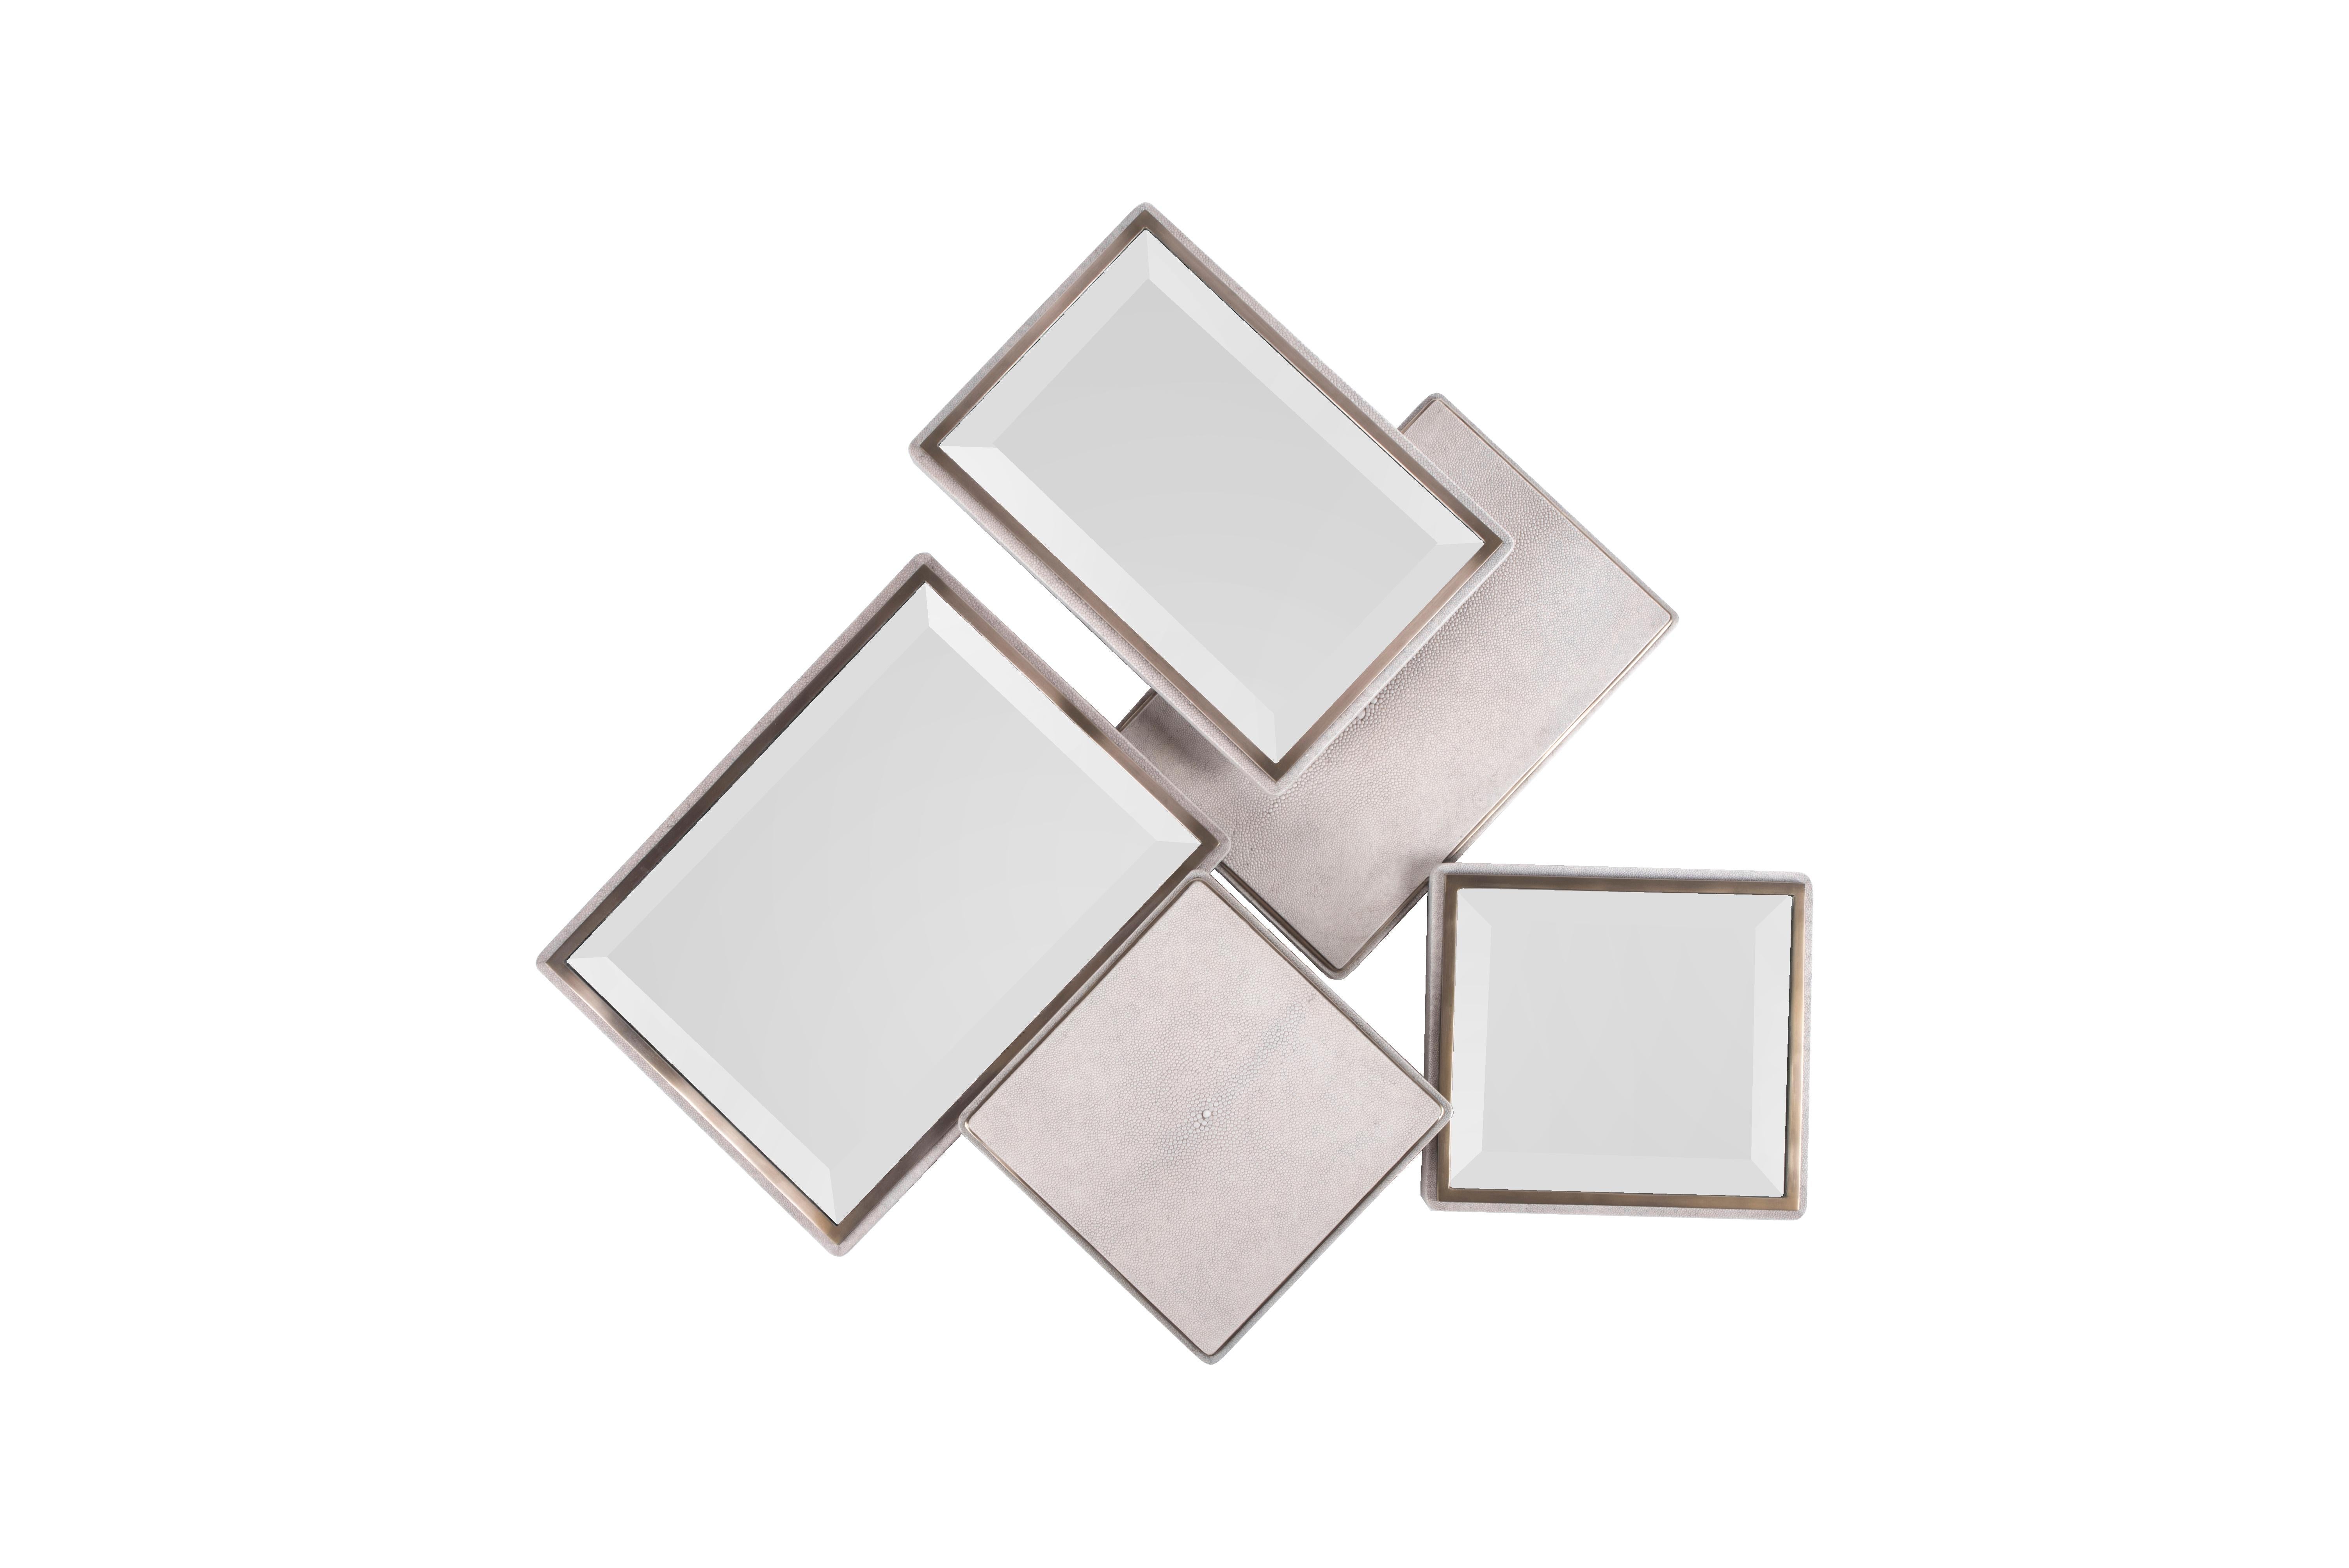 The Mondrian Mirror Large is a playful graphic piece with it's geometric mixture of mirror parts and cream shagreen parts that are placed on different levels. The shagreen parts have a discreet metal indentation detail adding another element of